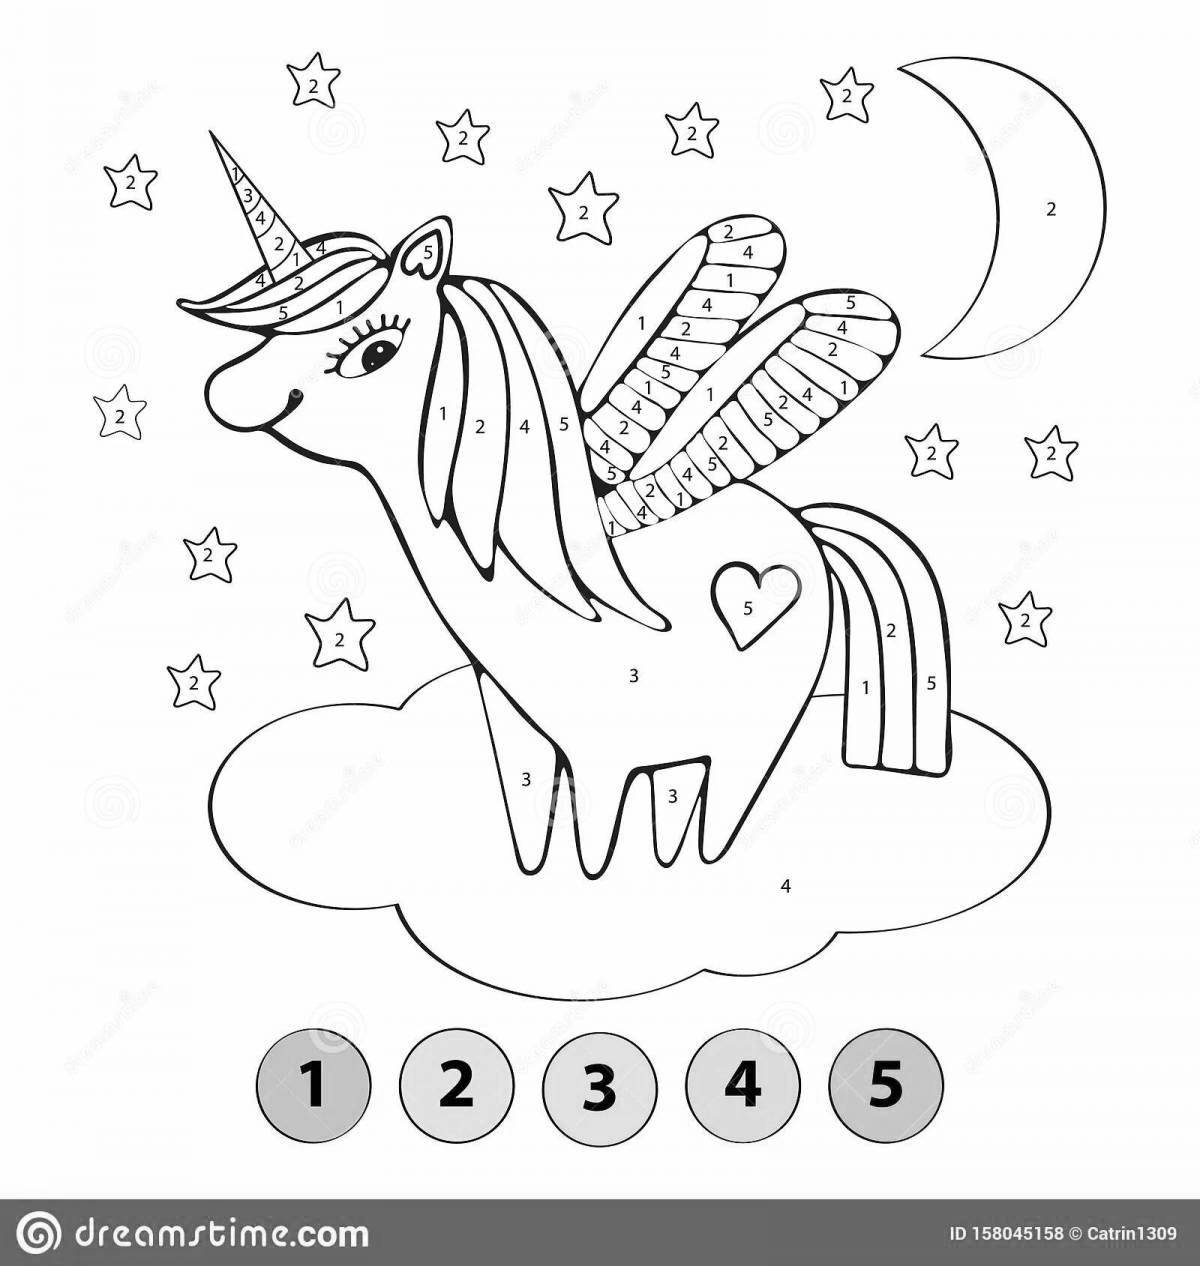 Magic unicorn coloring by numbers for kids